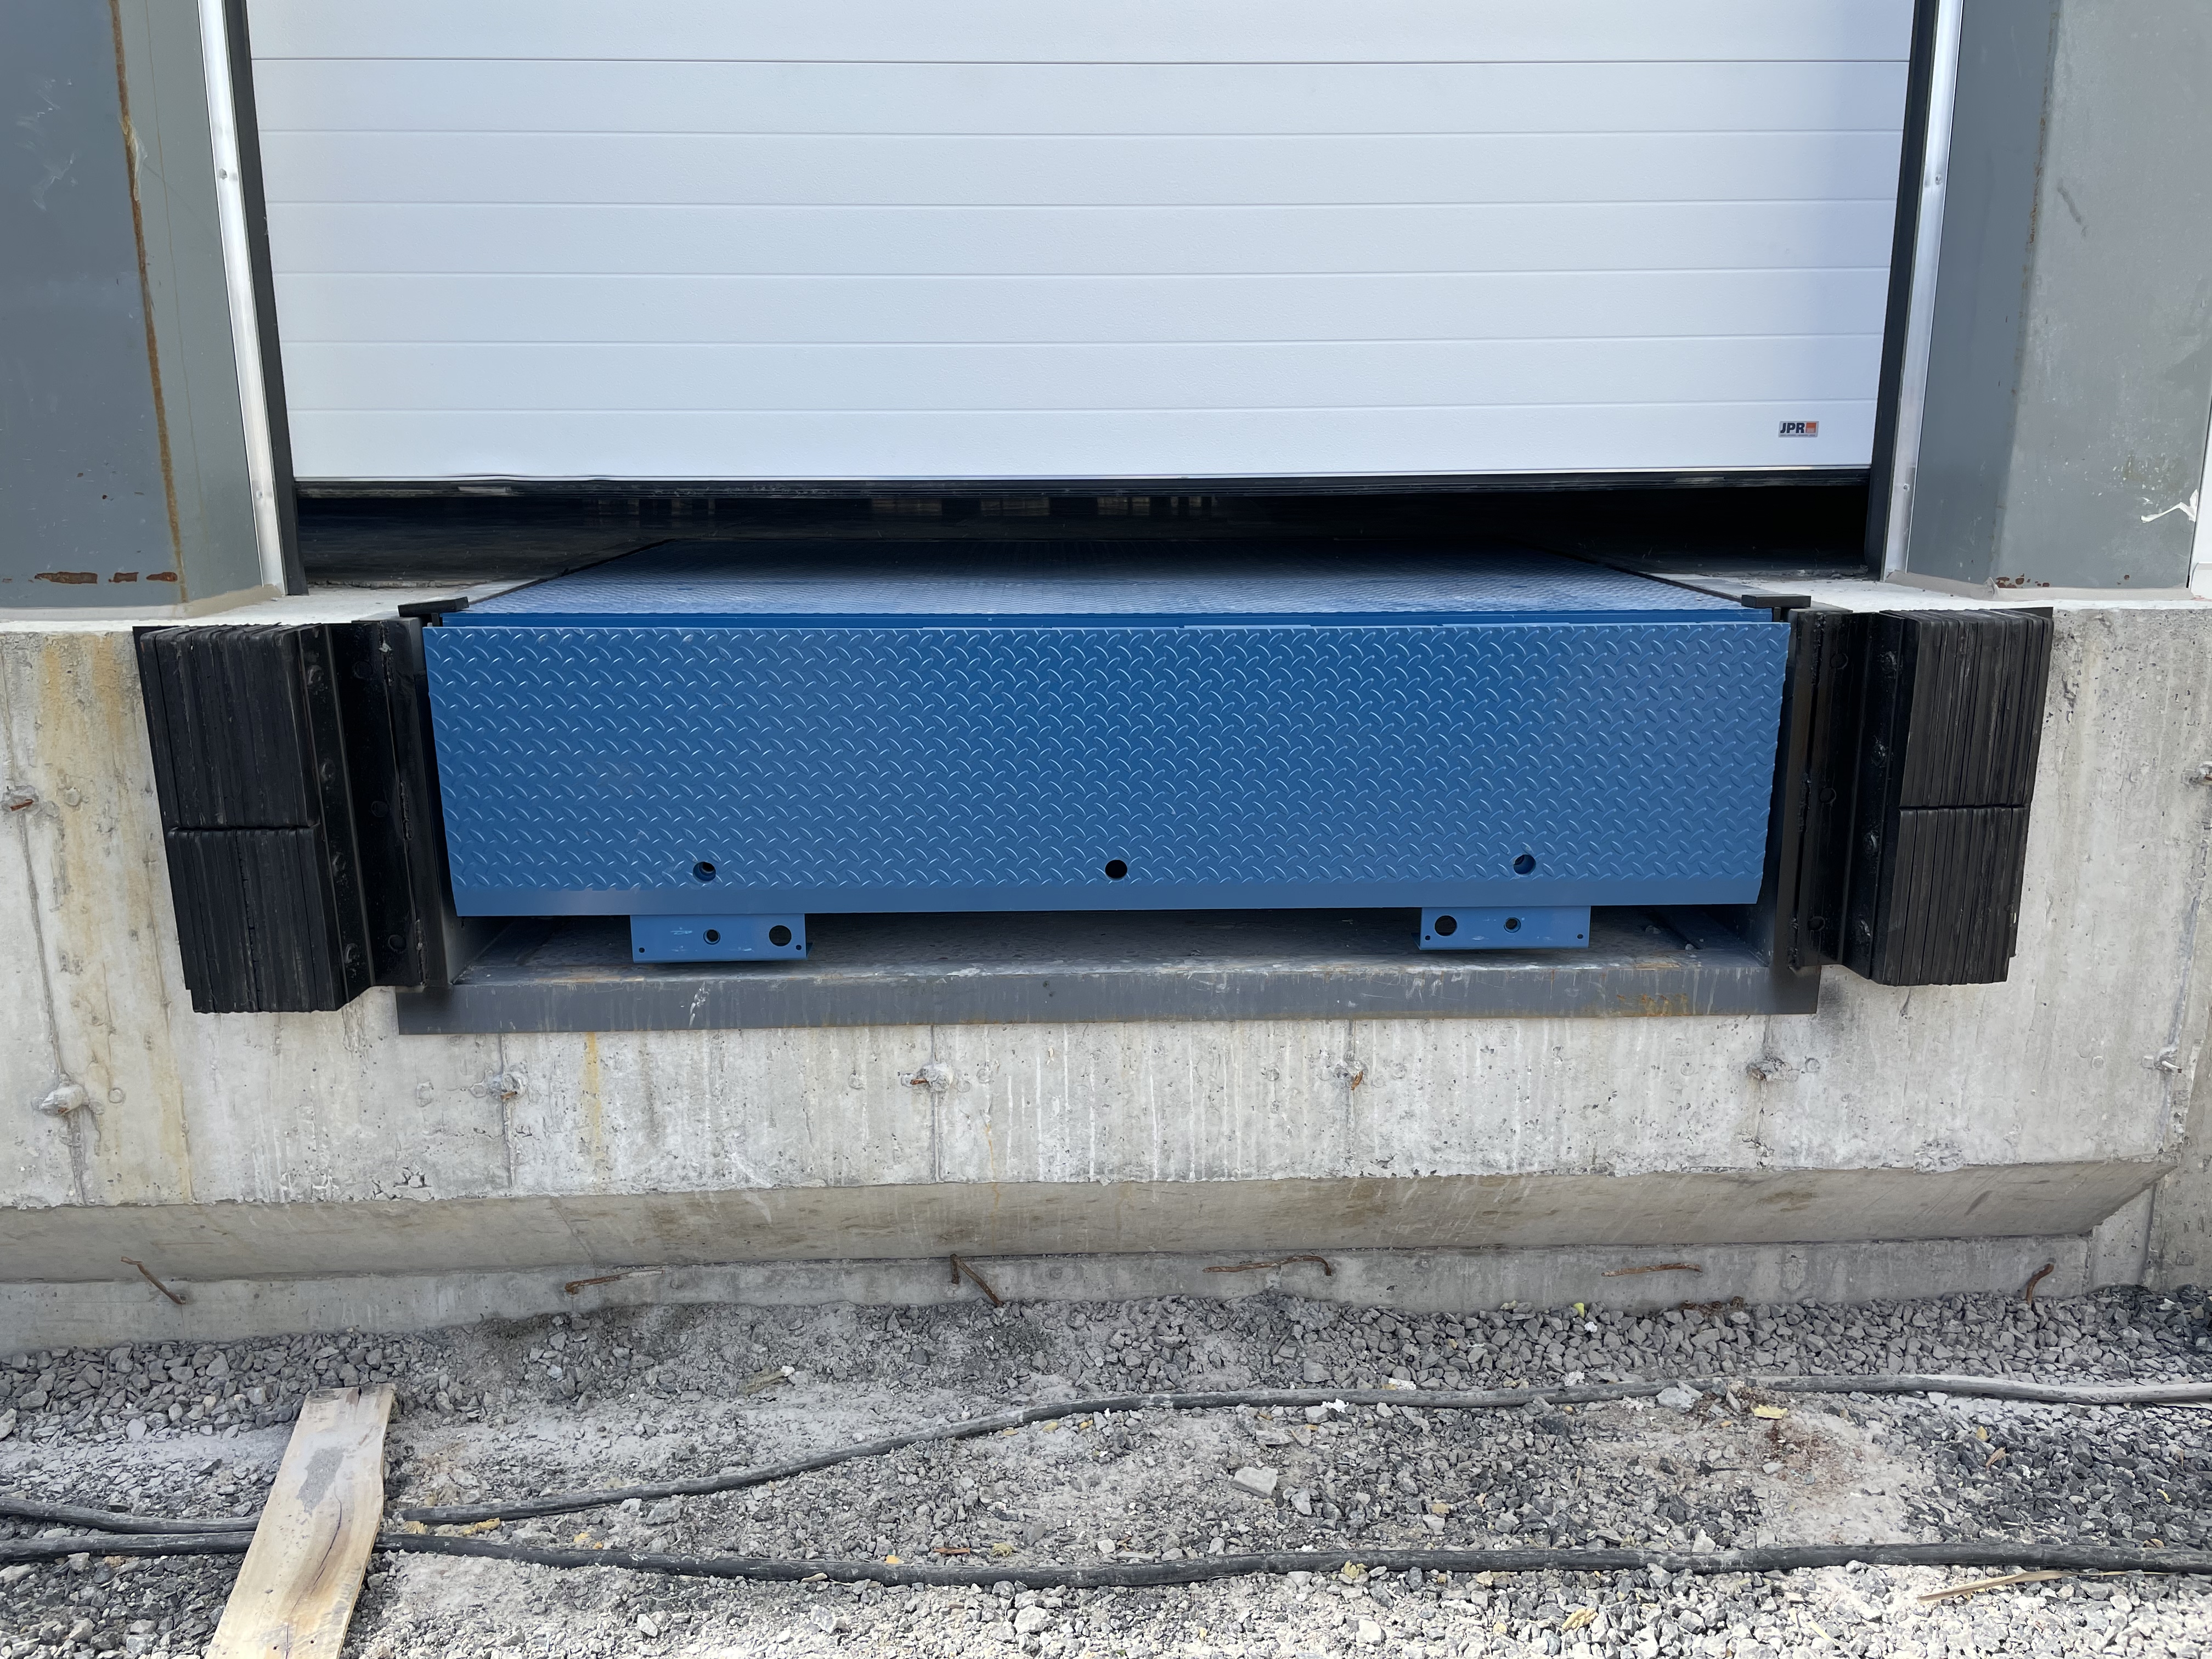 How to create a safe loading dock